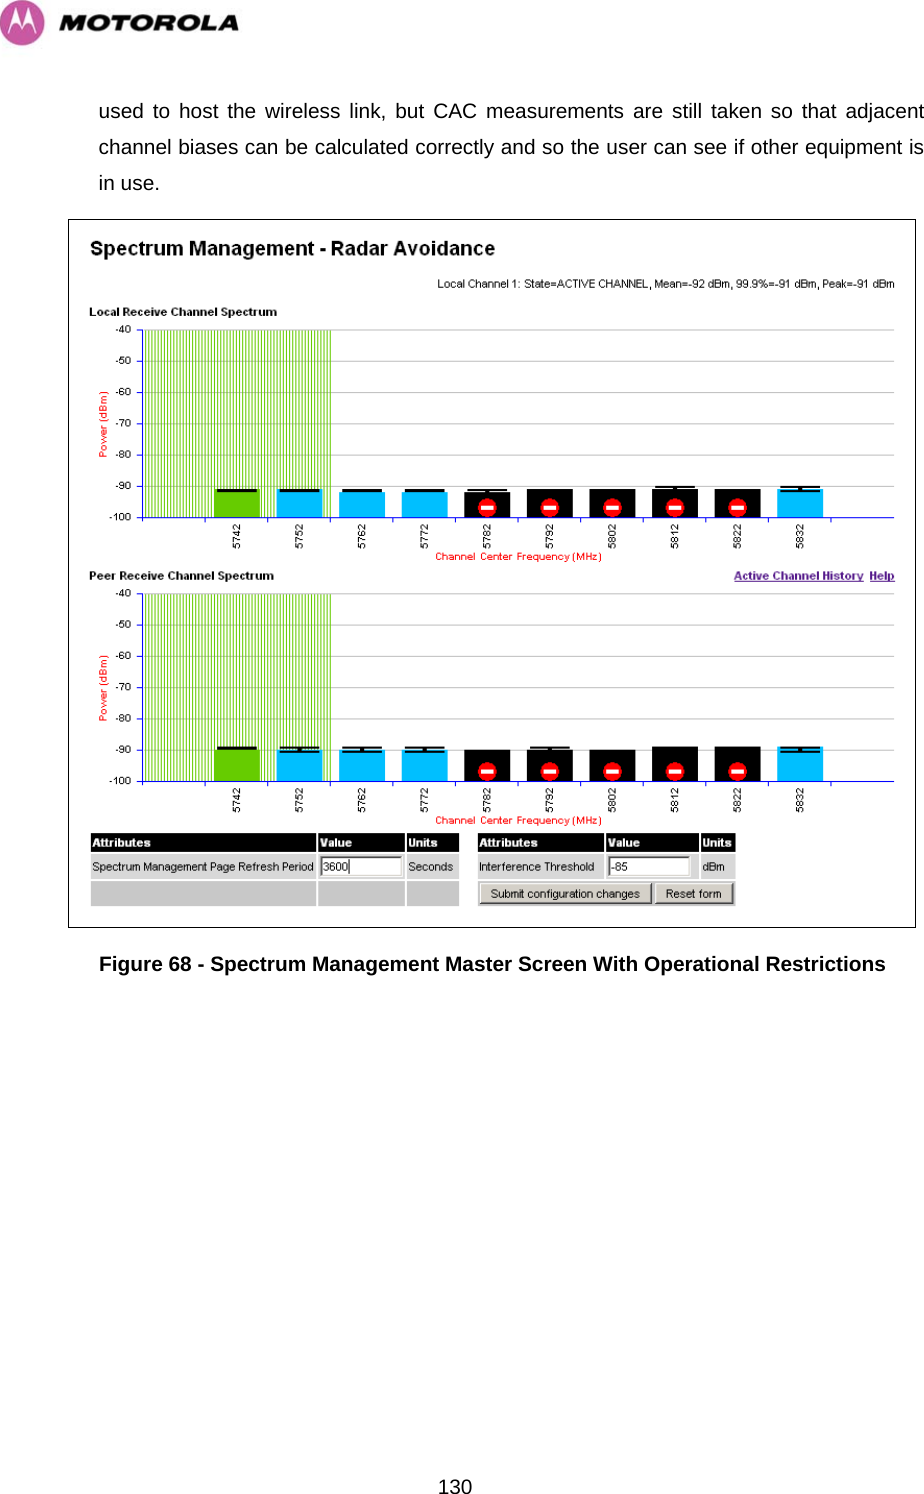   130used to host the wireless link, but CAC measurements are still taken so that adjacent channel biases can be calculated correctly and so the user can see if other equipment is in use.  Figure 68 - Spectrum Management Master Screen With Operational Restrictions 